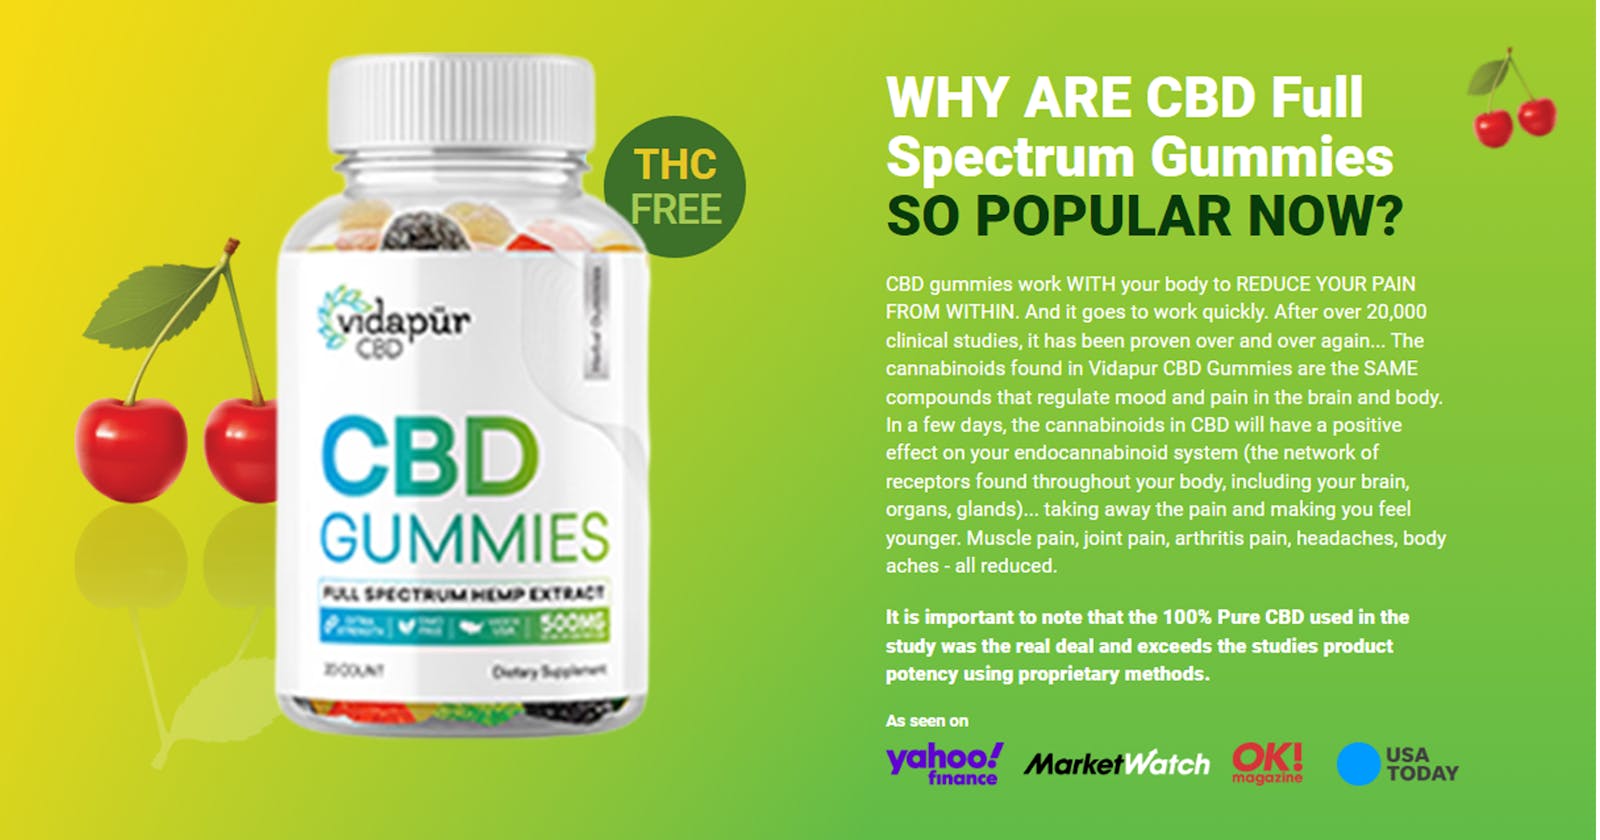 Vidapur CBD Gummies Benefits, Anxiety, Stress Free, Pain Relief, Ingredients, Side Effects {Scam Or Legit} #Price & Order Now?